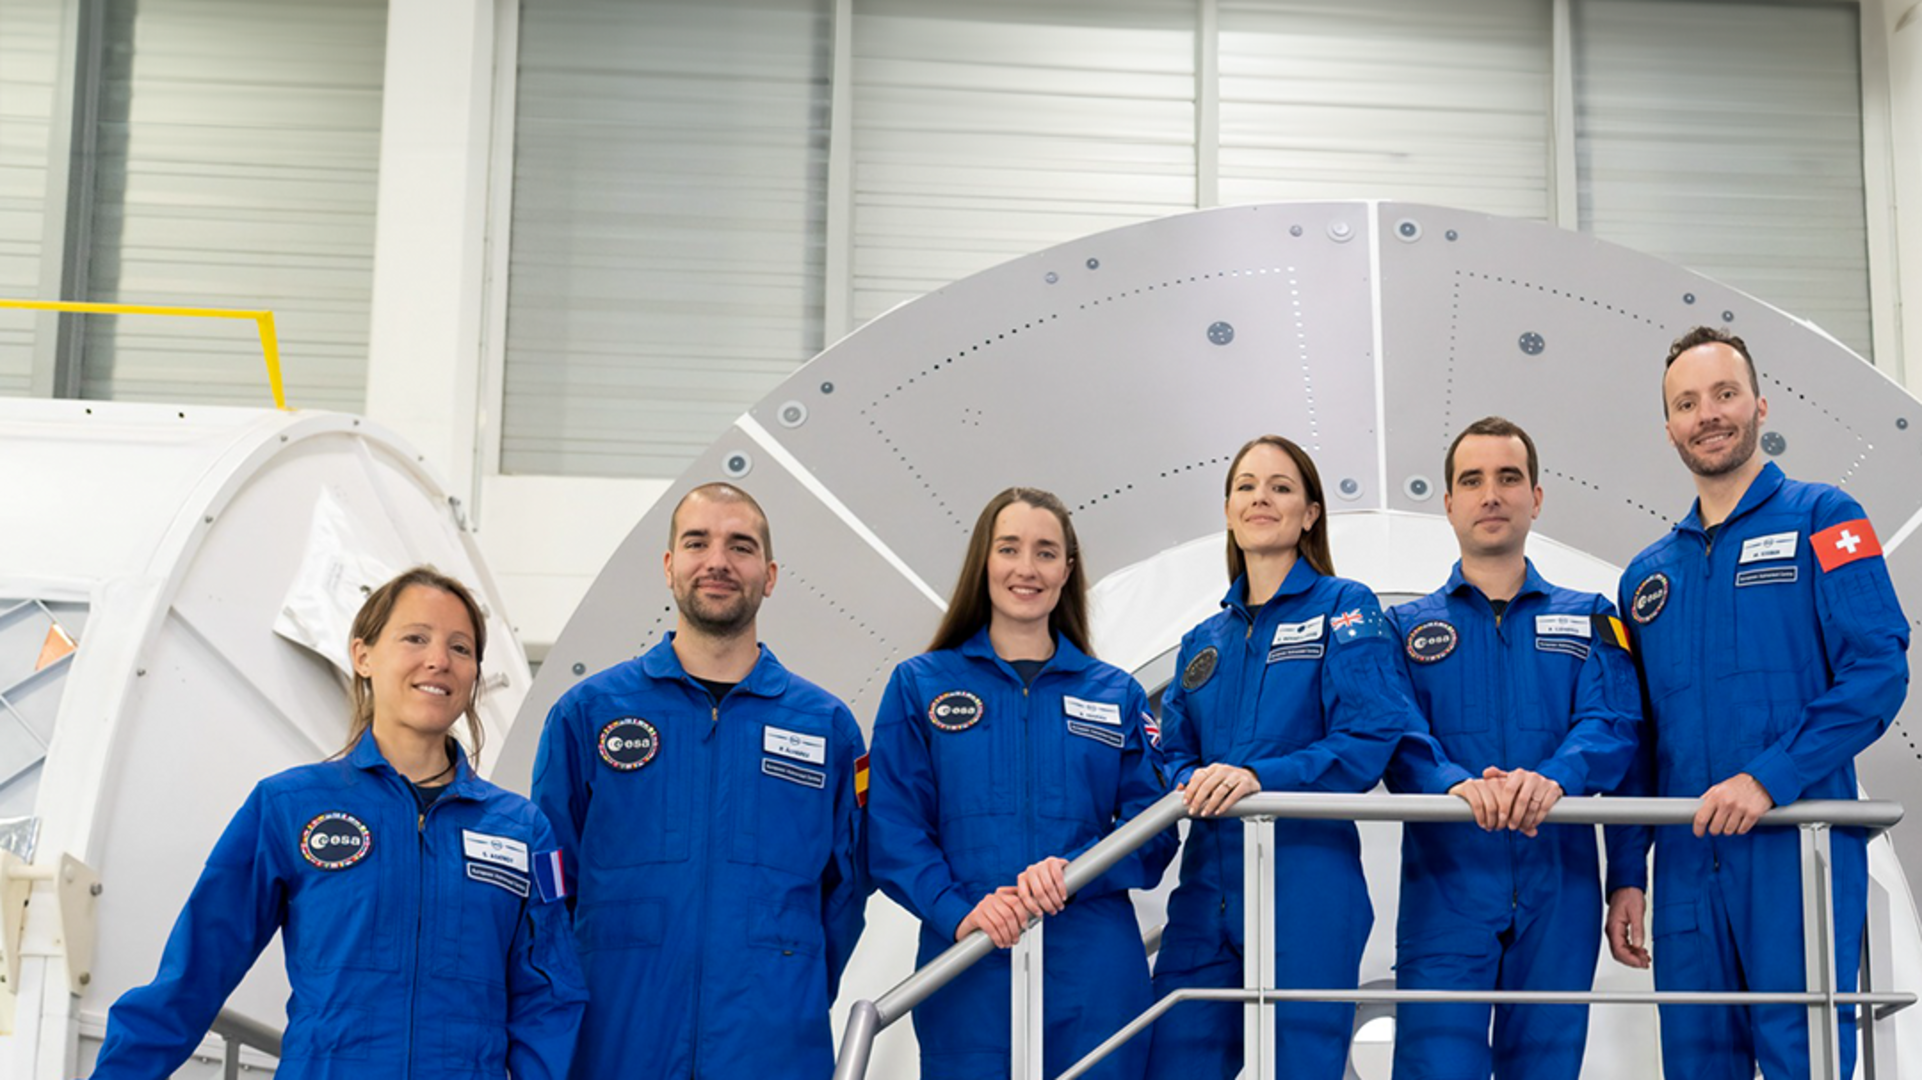 ESA astronaut candidates of the class of 2022